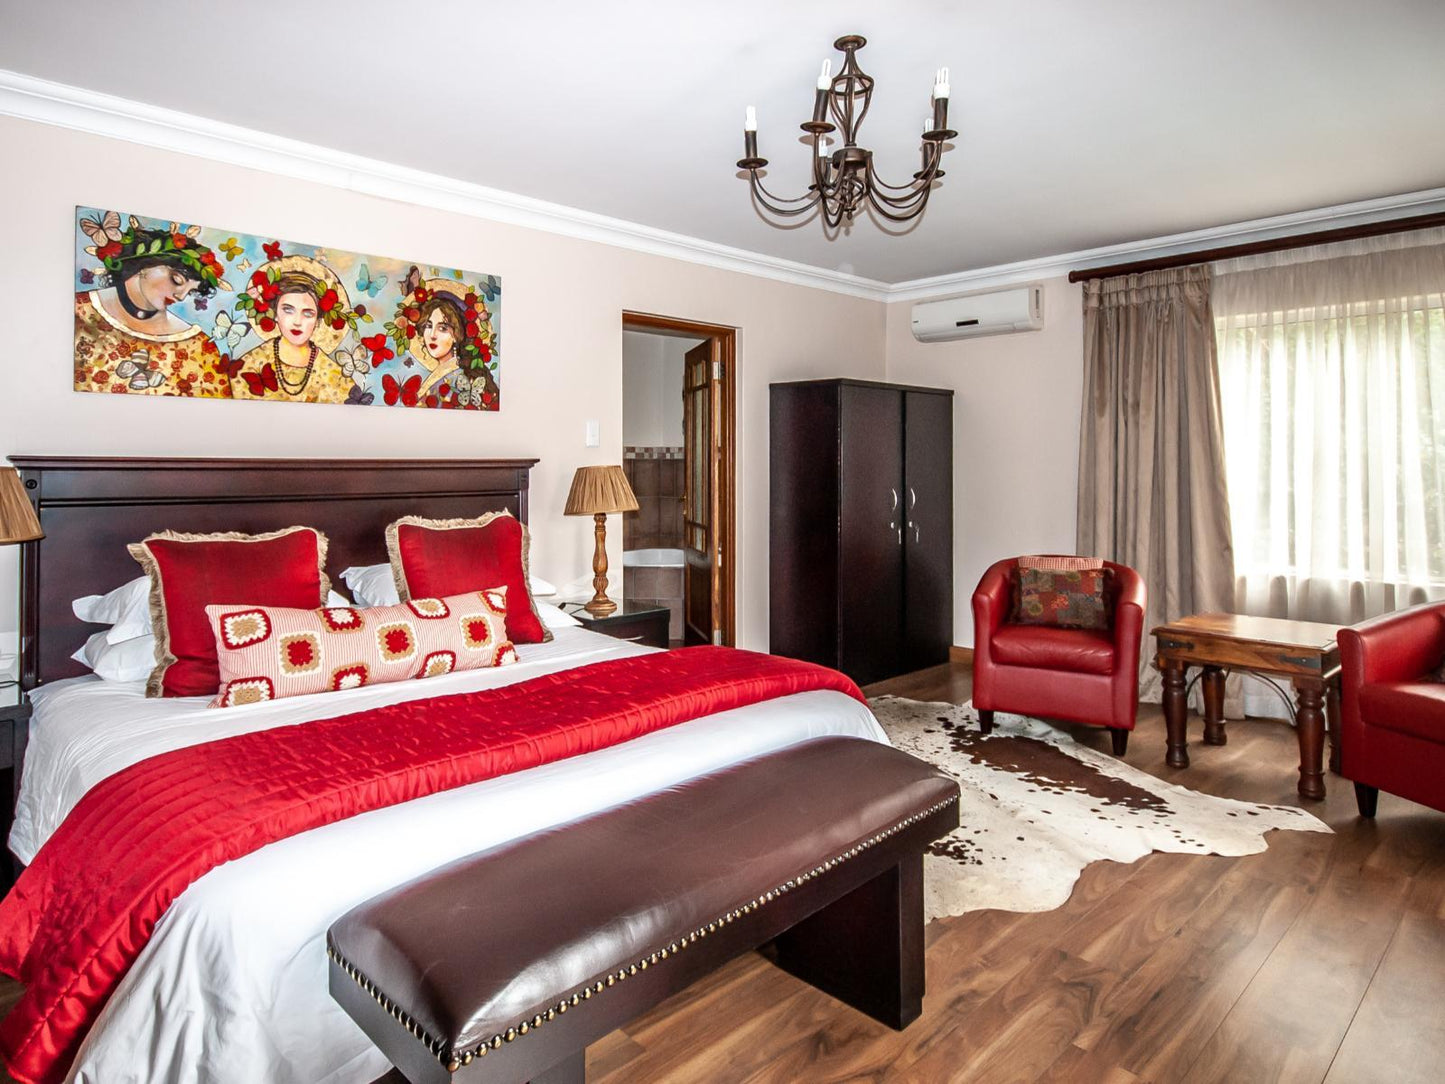 Executive Rooms @ Sunward Park Guesthouse & Conference Centre